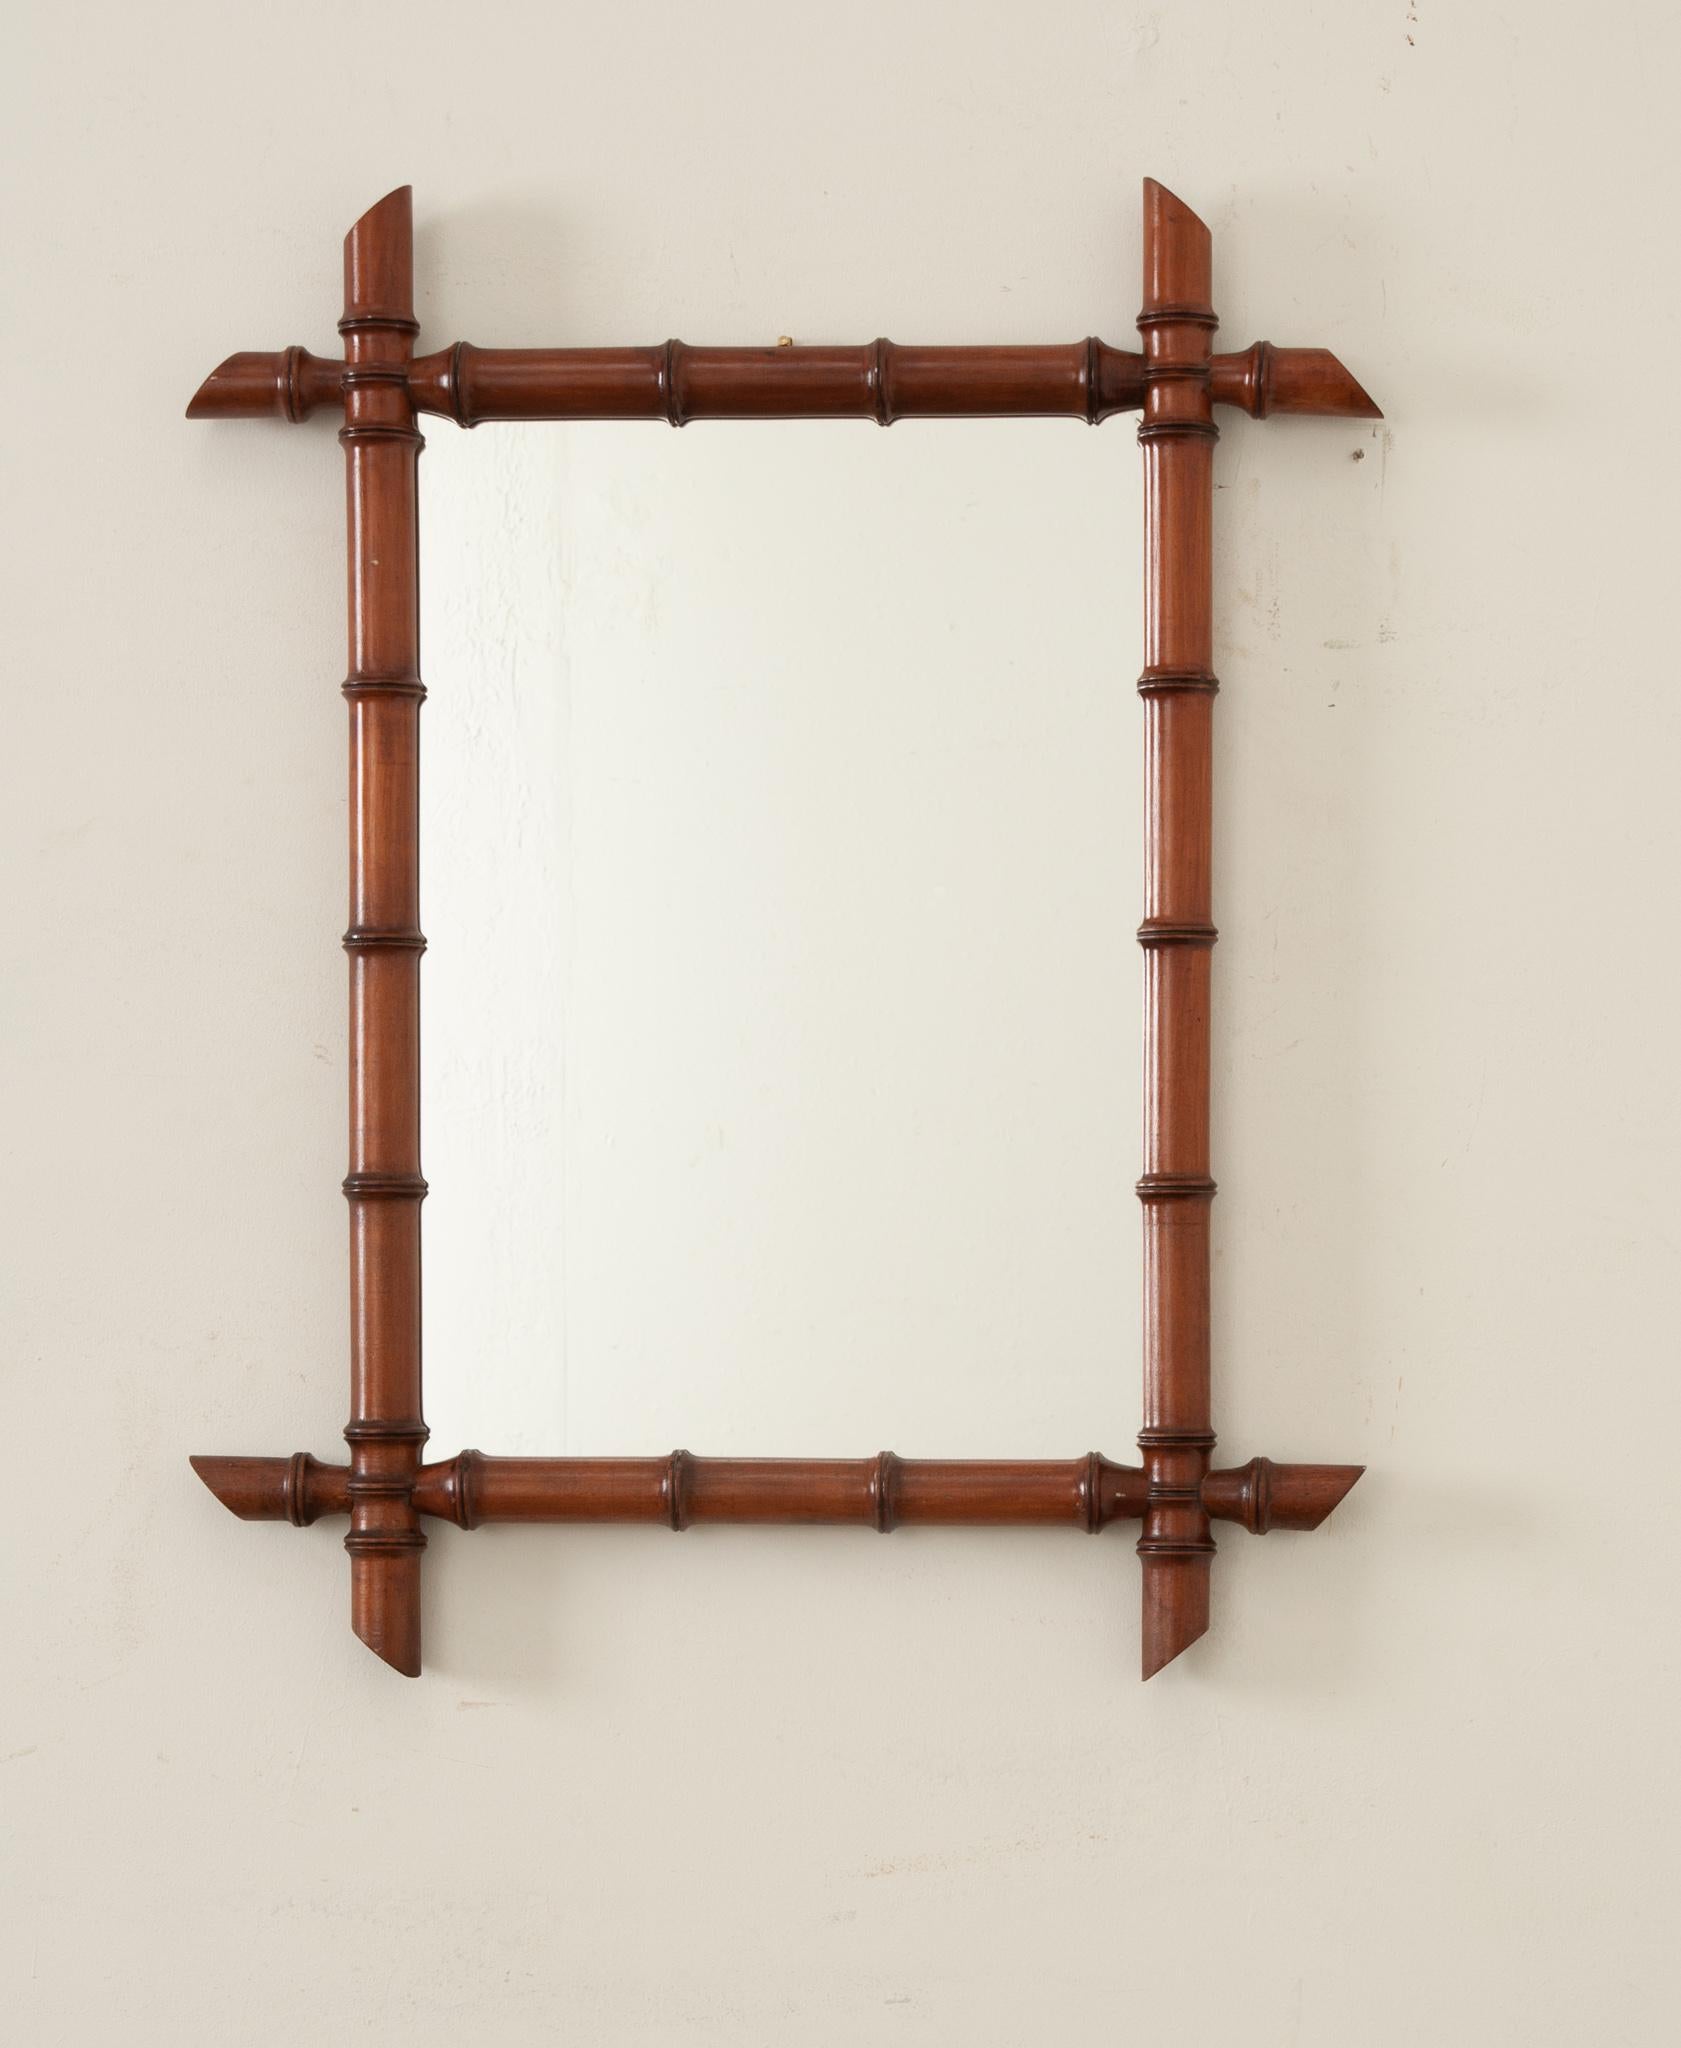 A French faux bamboo mirror circa 1900 with slanted accents, rich brown patina, and chic style. This mirror invites the opulence of history into your interior and is a nod to turn of the century elegance and charm. The mirror’s wood frame has been